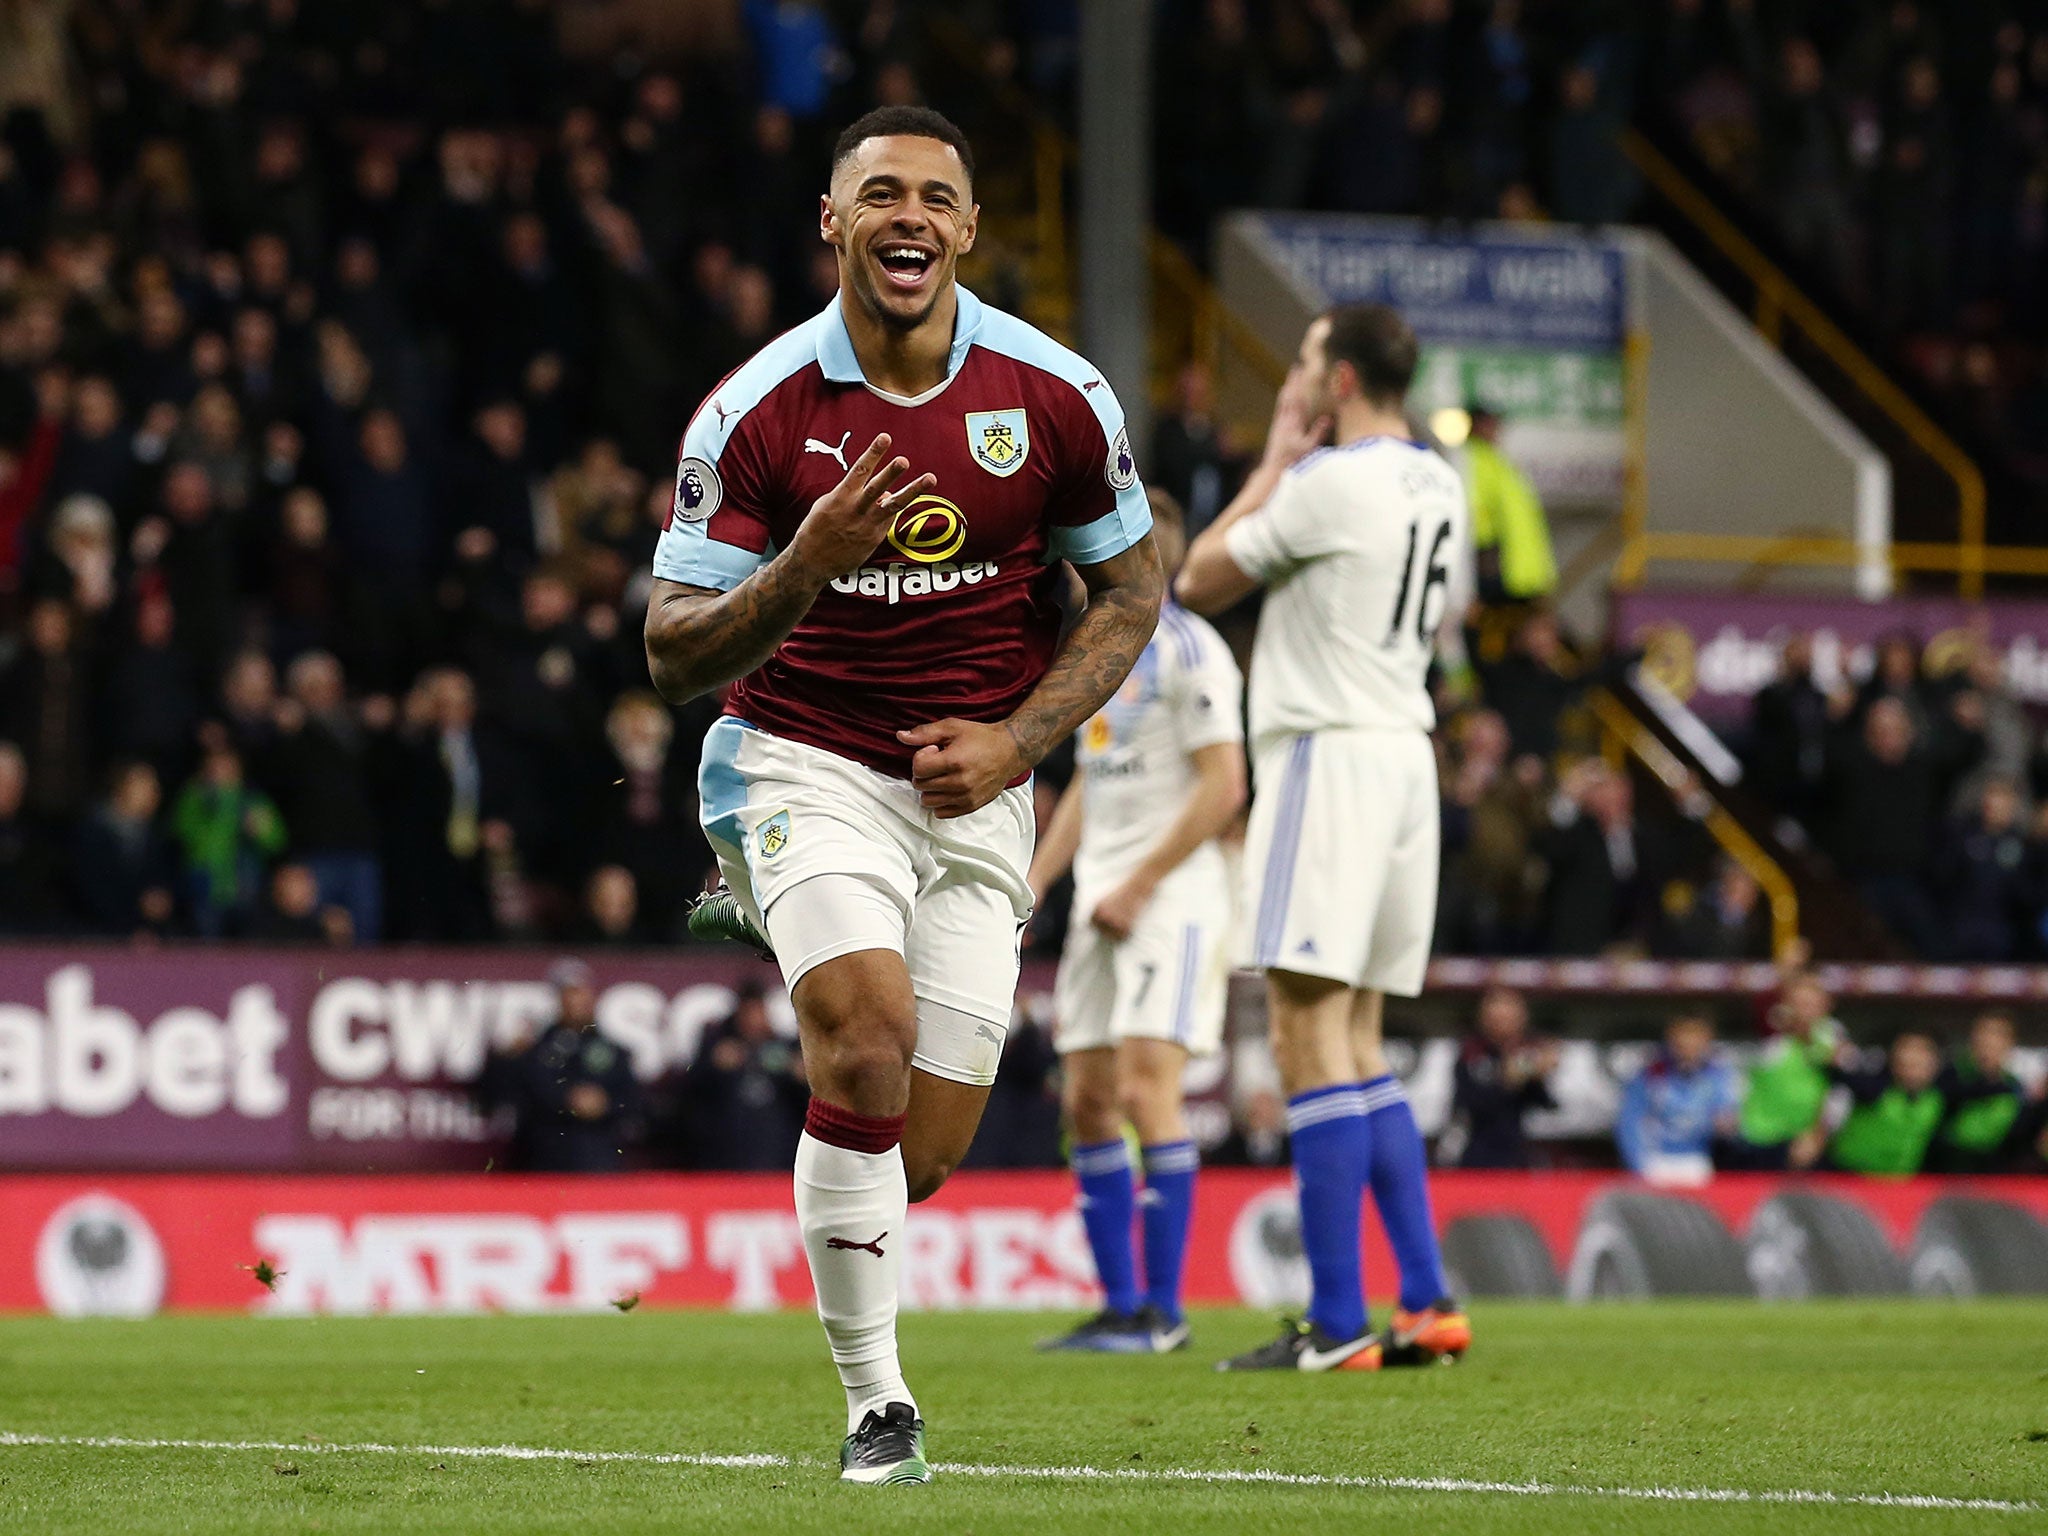 Andre Gray will be the man to watch